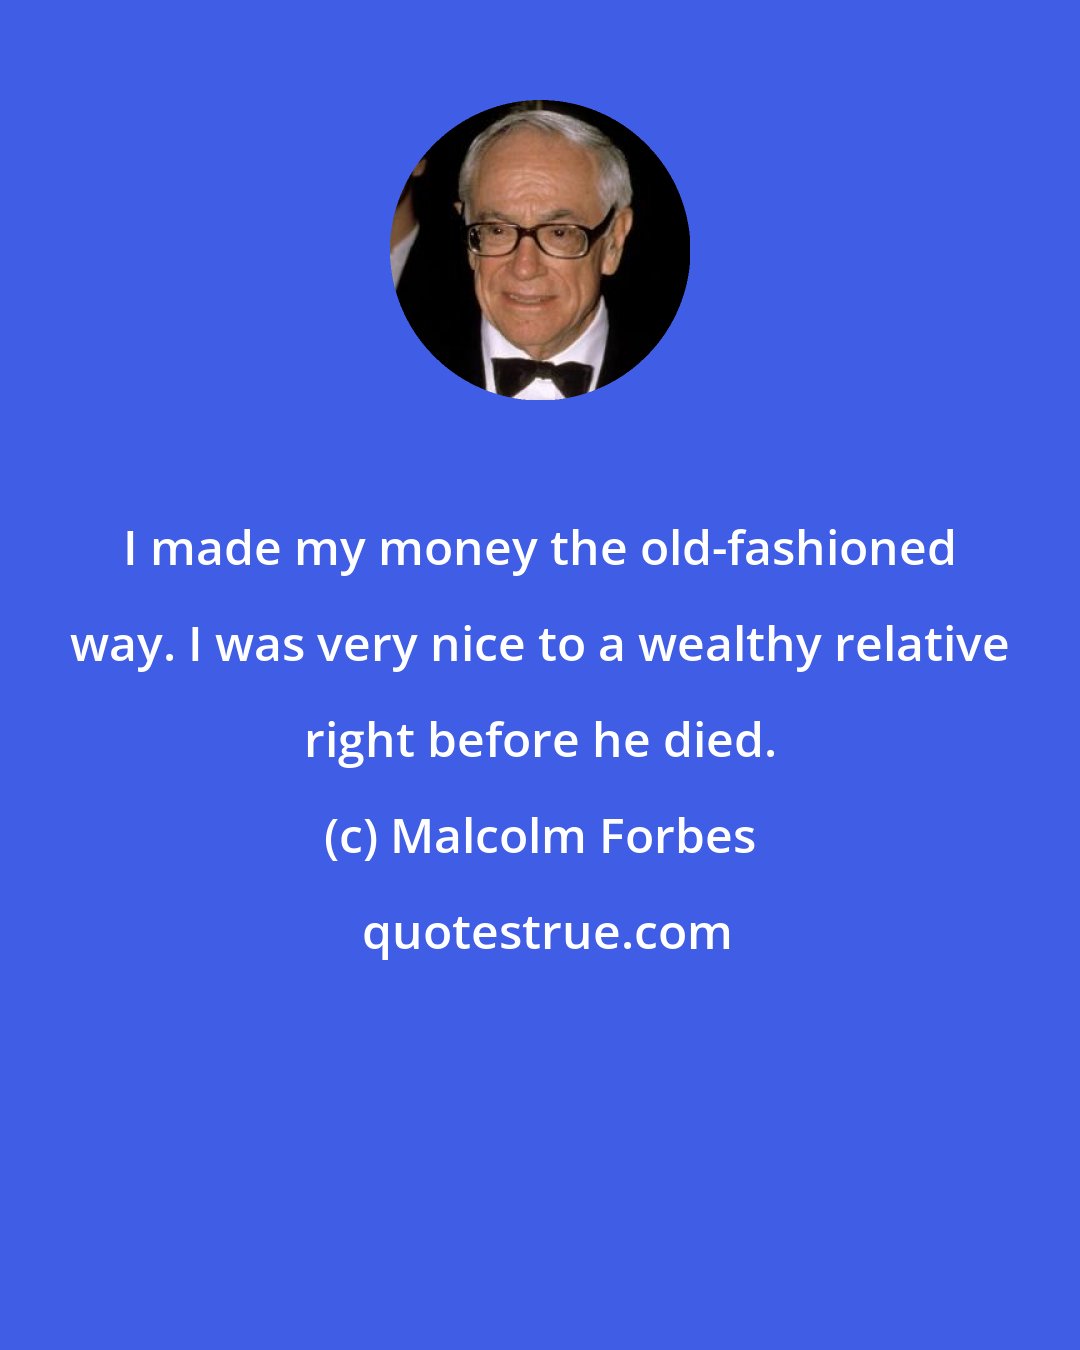 Malcolm Forbes: I made my money the old-fashioned way. I was very nice to a wealthy relative right before he died.